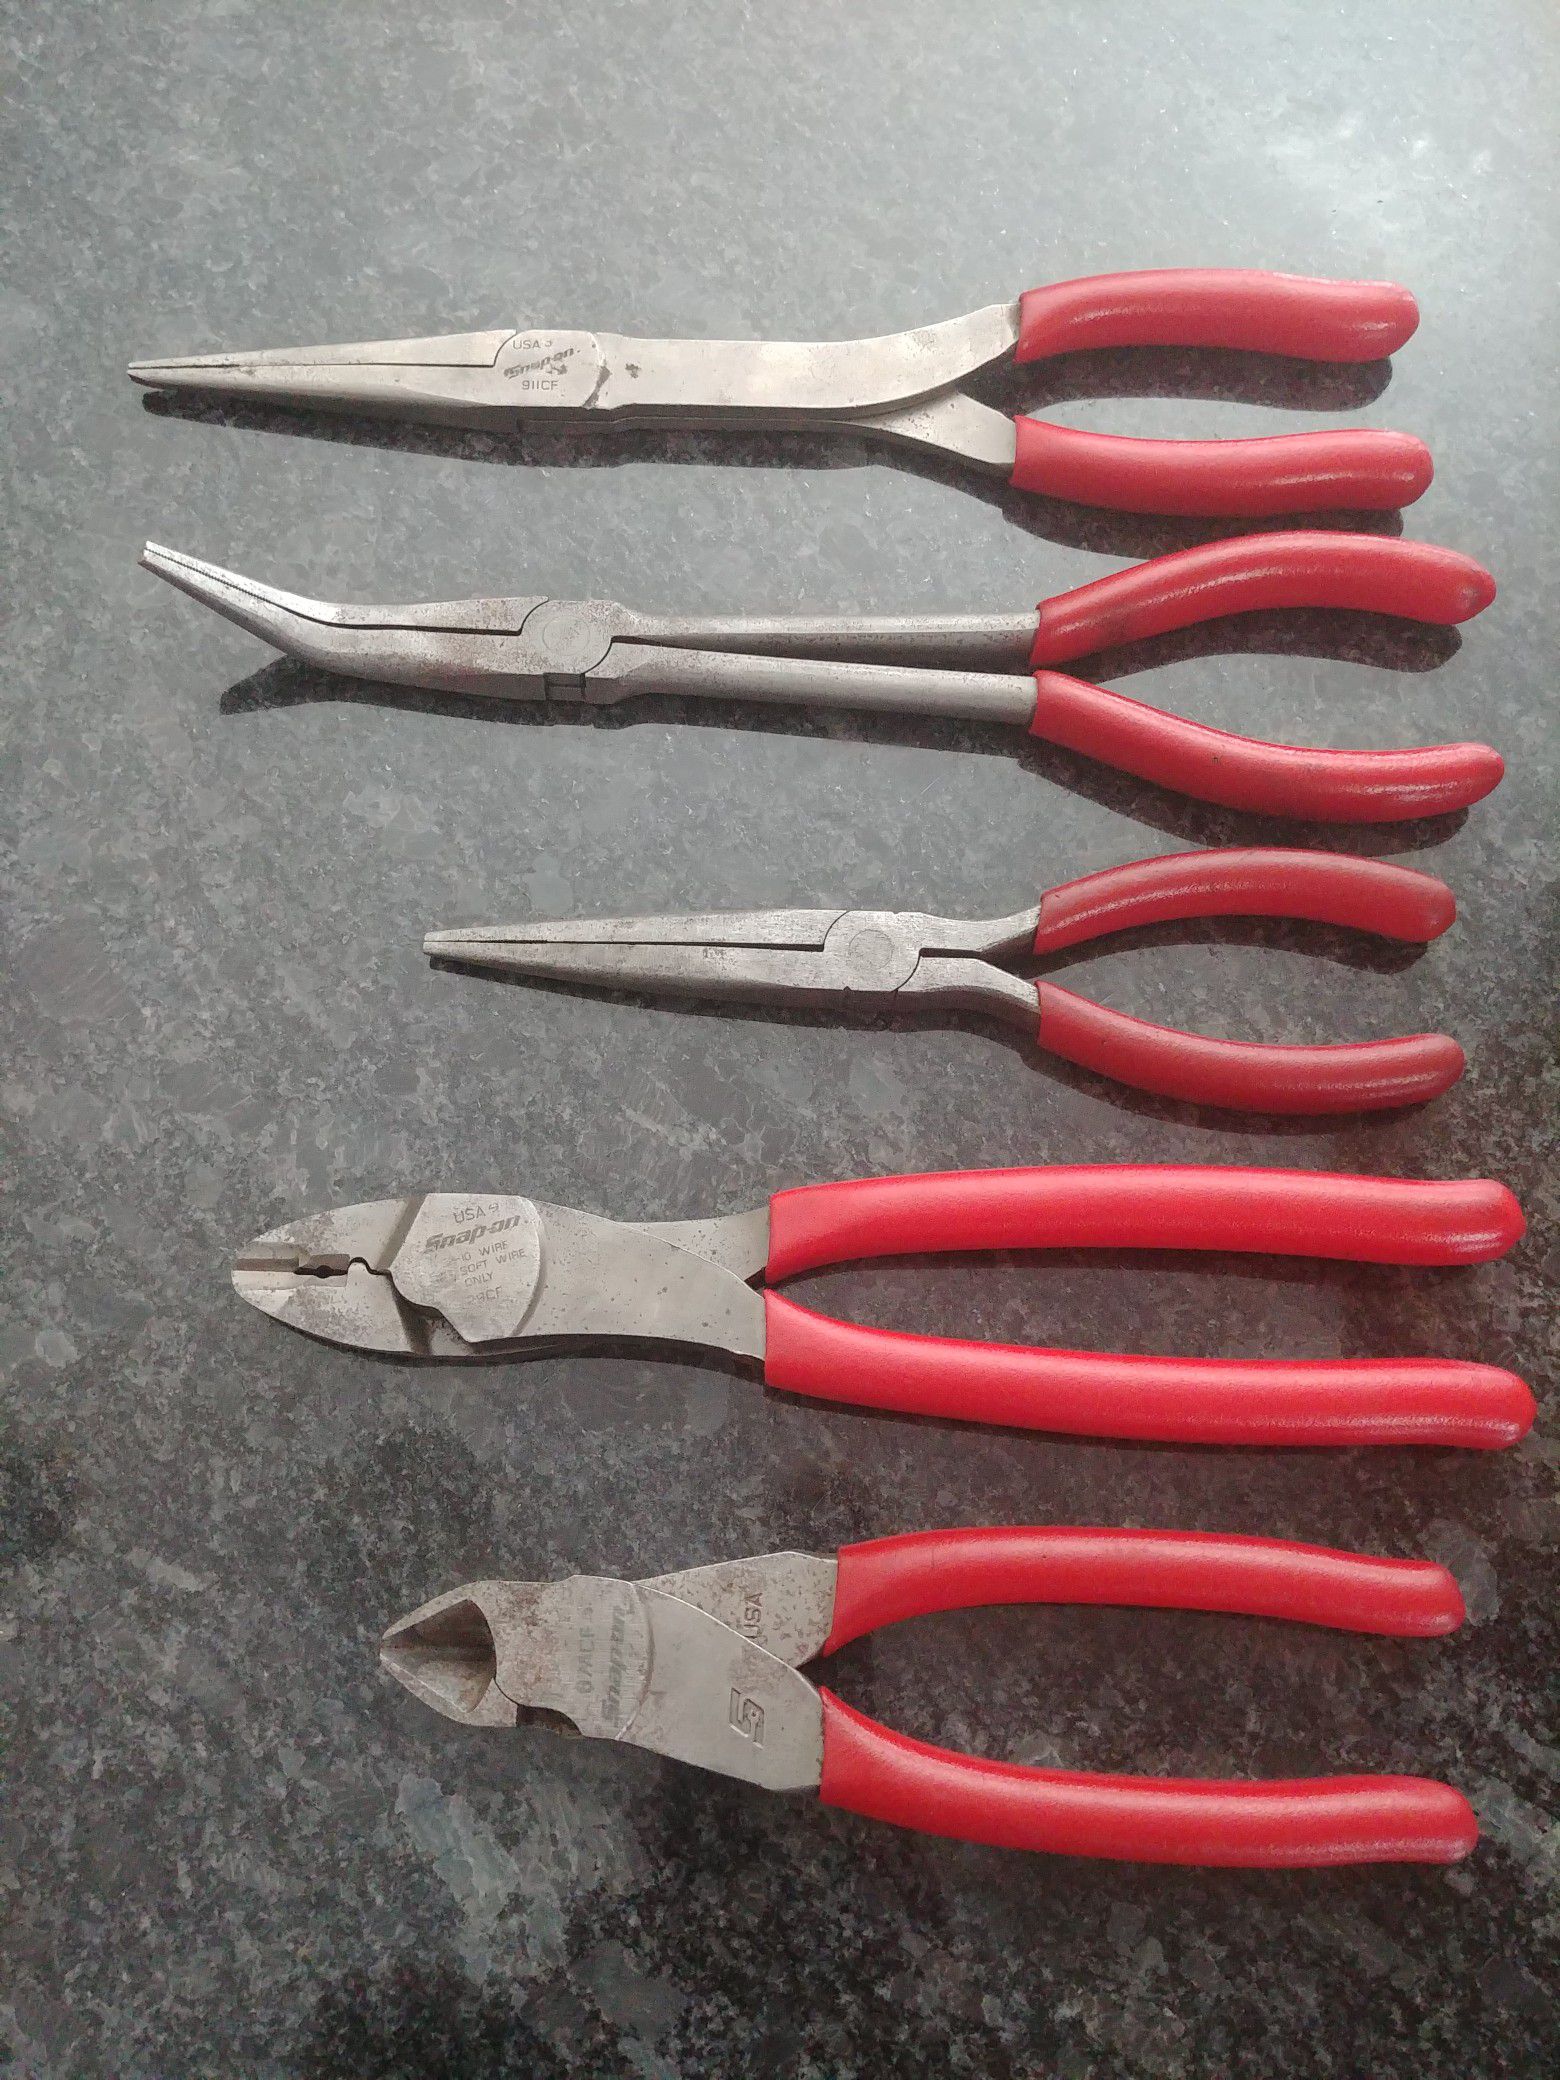 Snap-on Tools Pliers / cutter set